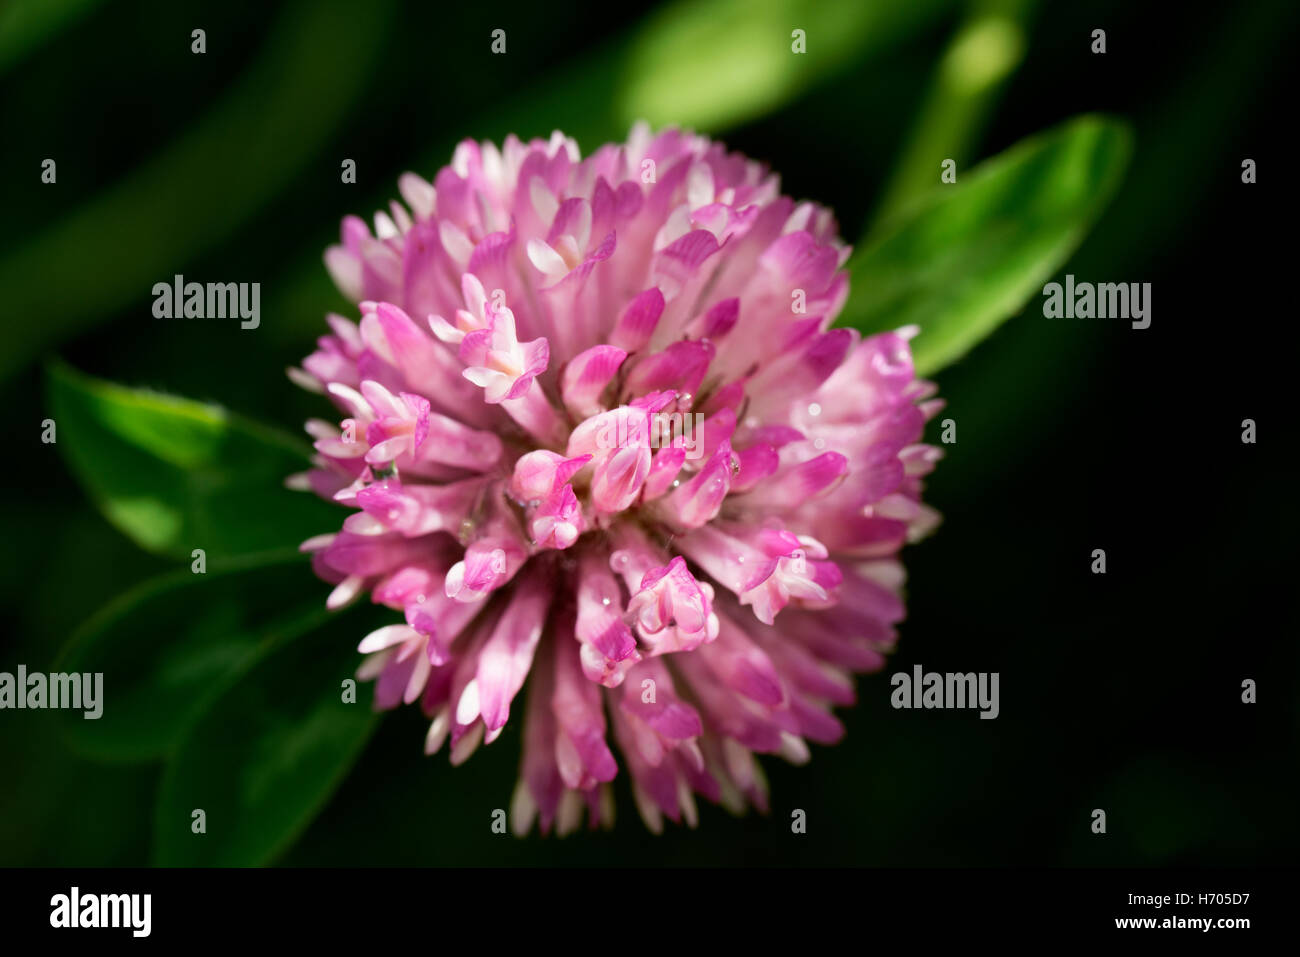 Colorful flowers and clarity Stock Photo